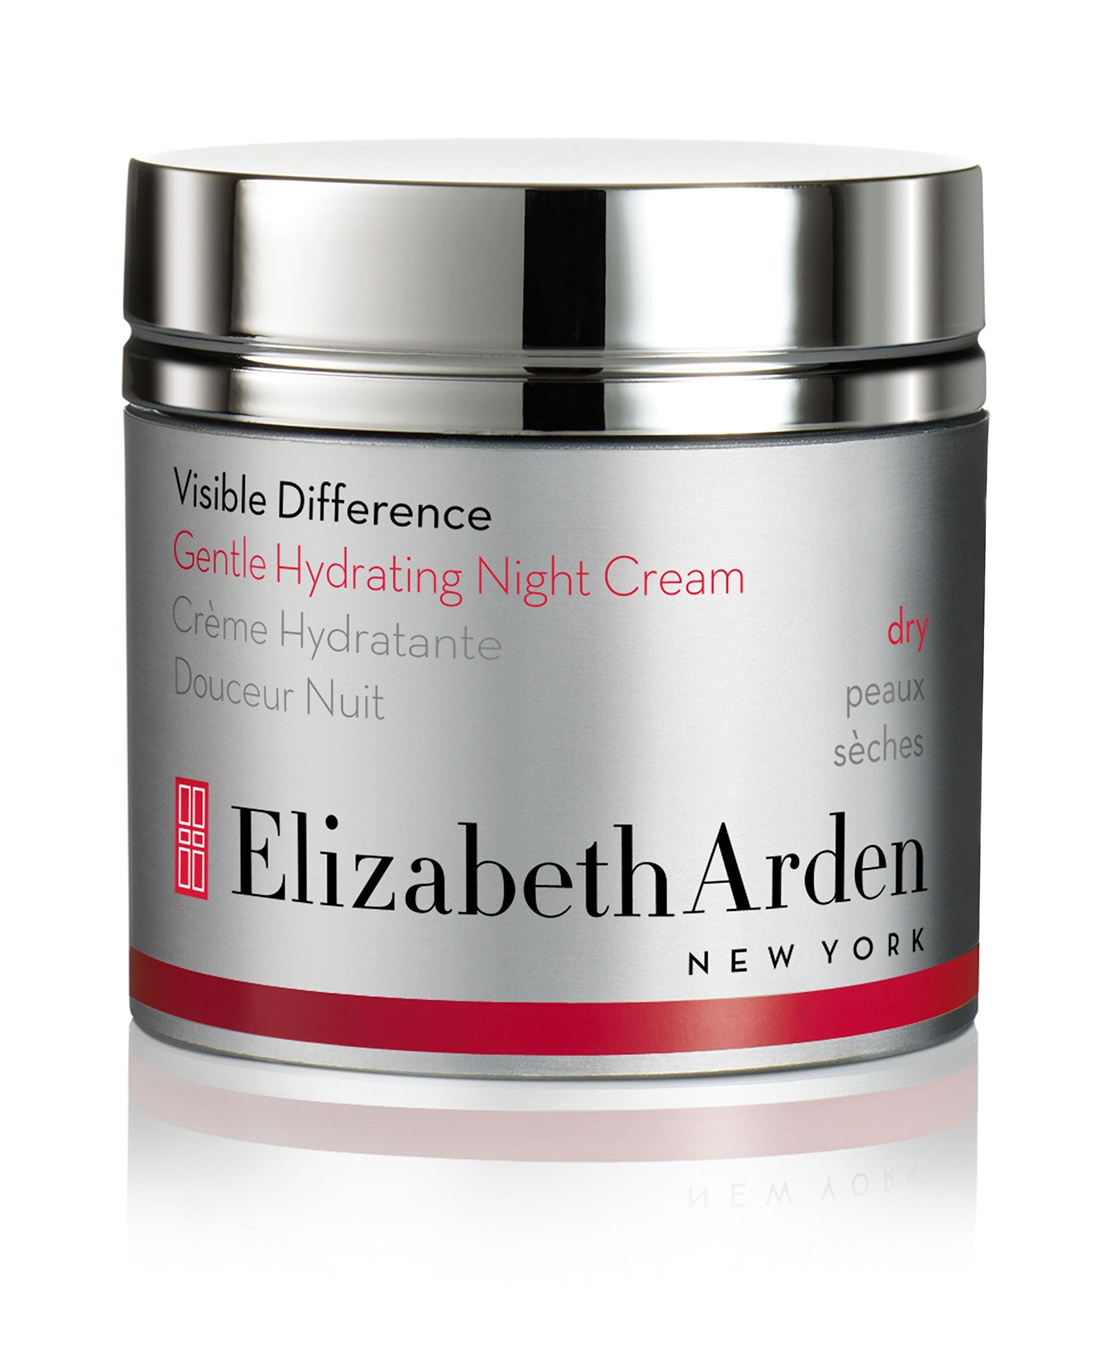  Visible Difference Gentle Hydrating Night Cream